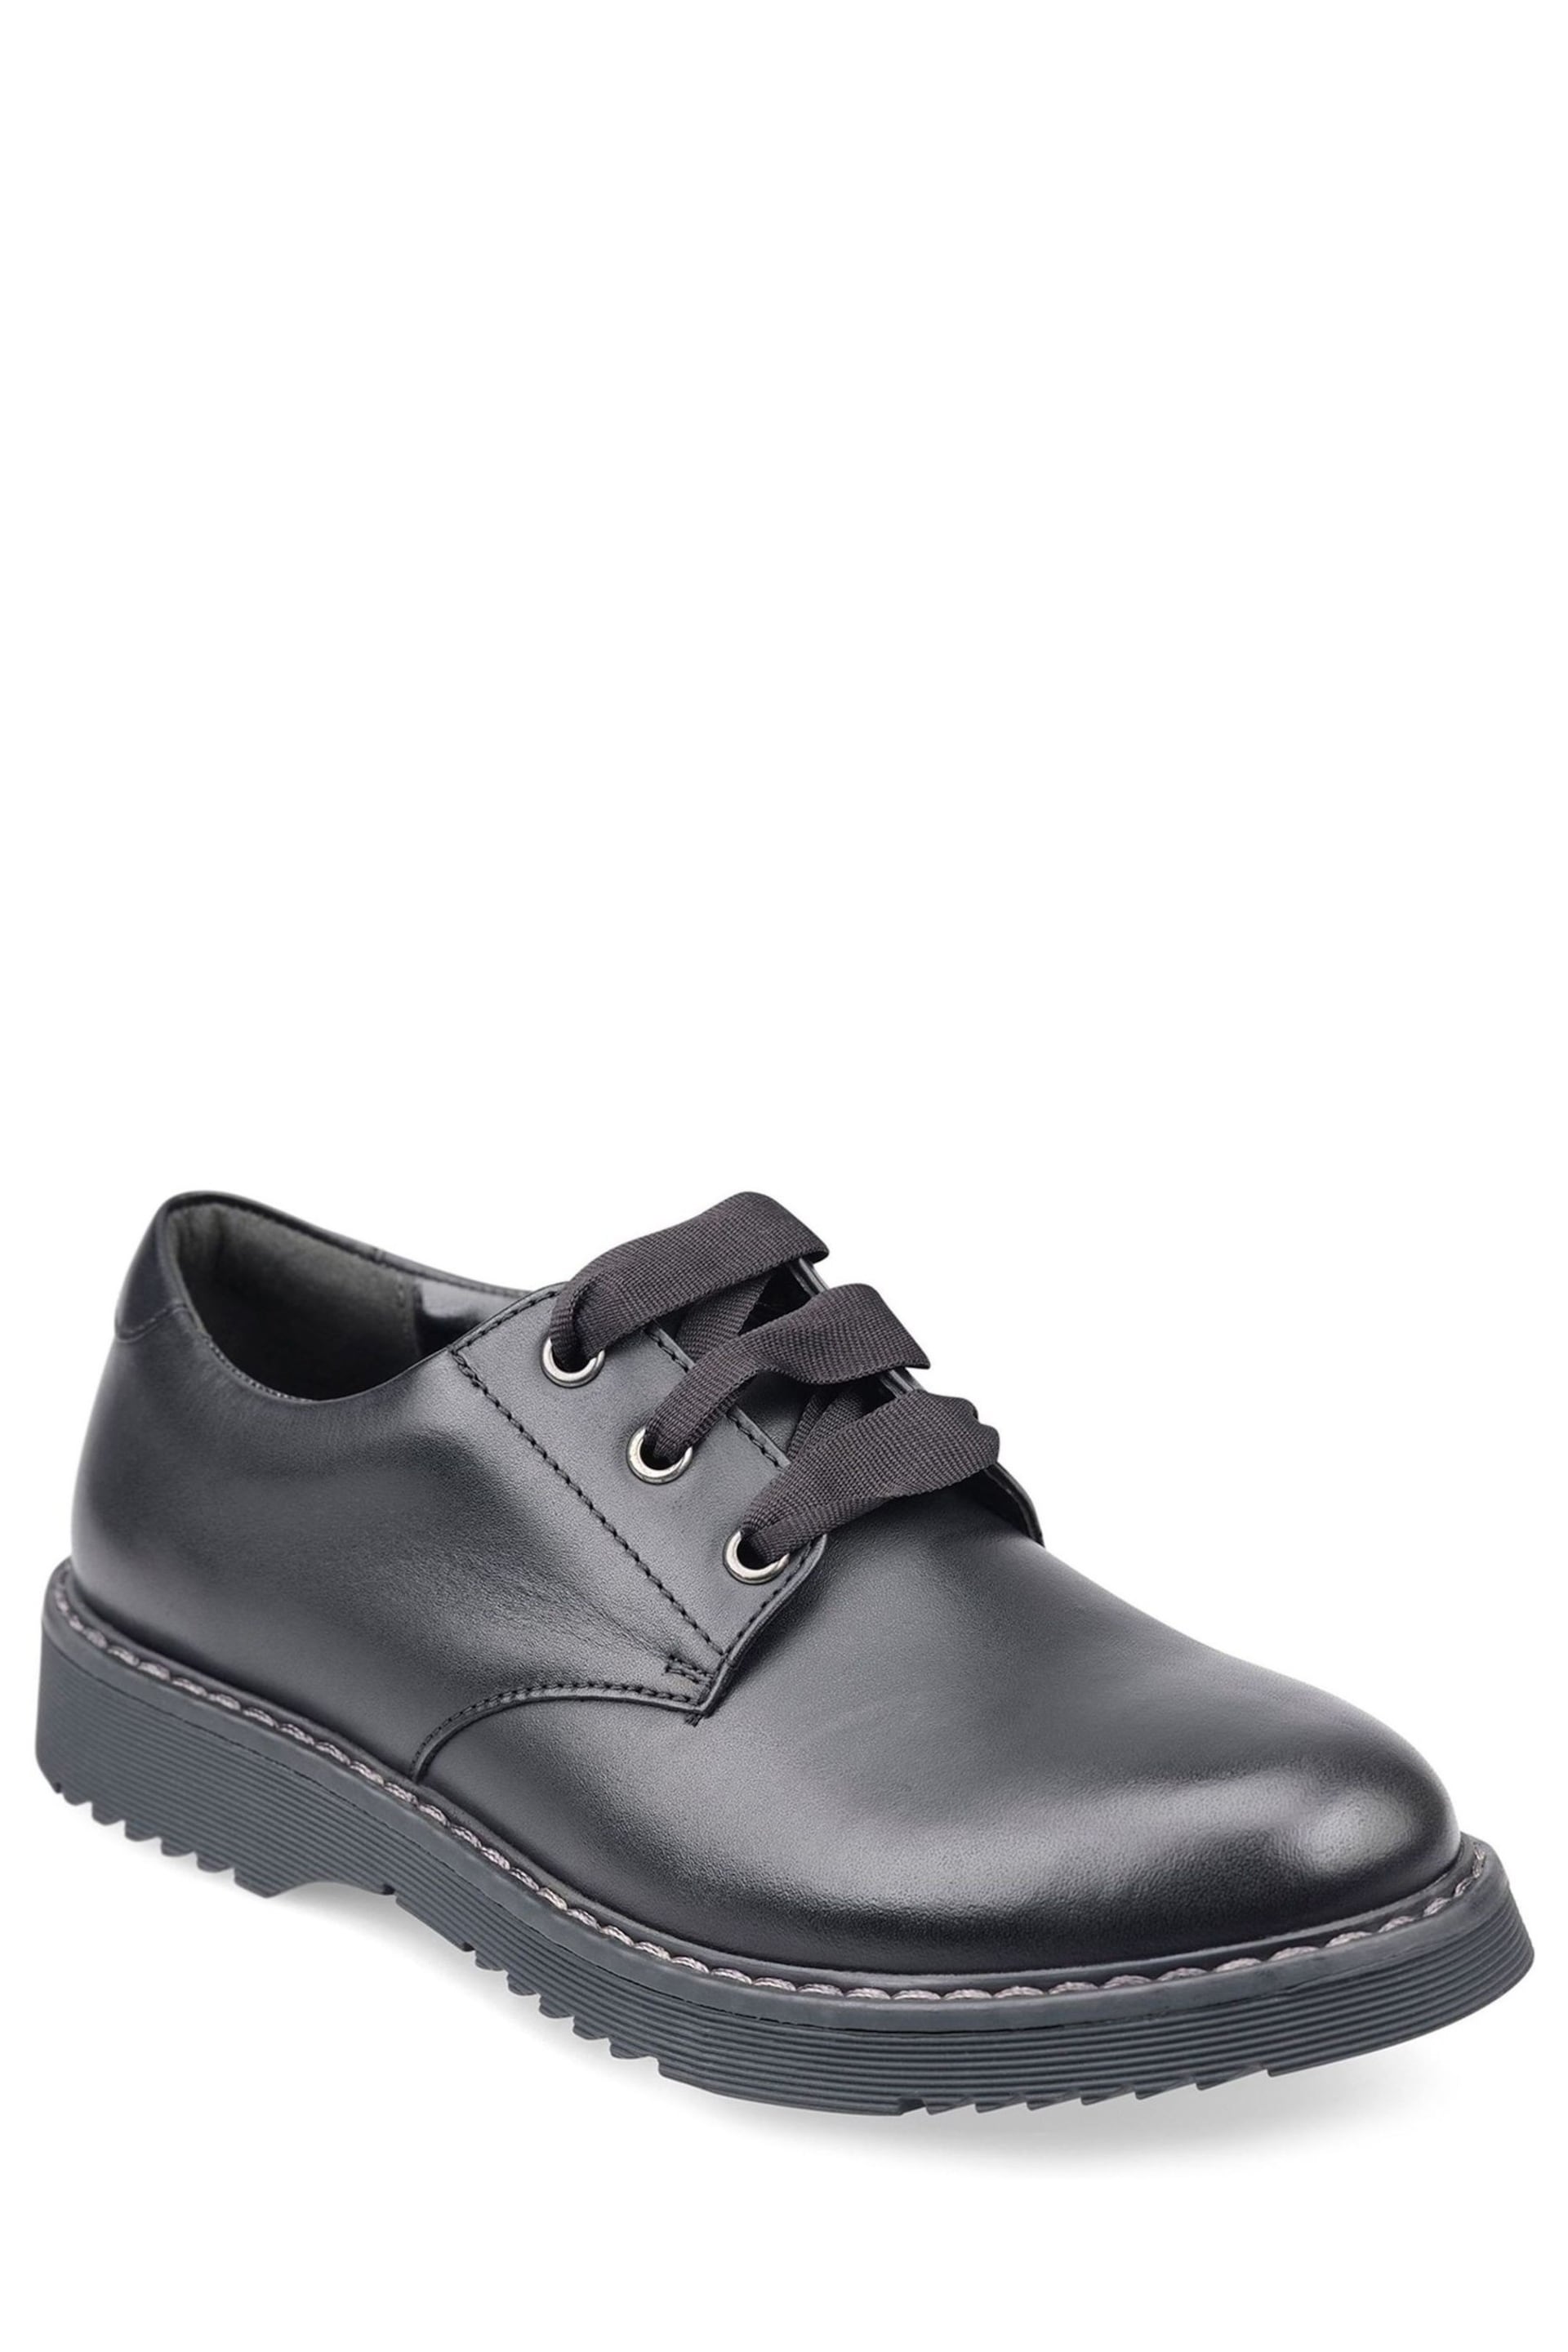 Start-Rite Impact Lace Up Black Leather School Shoes F Fit - Image 2 of 5